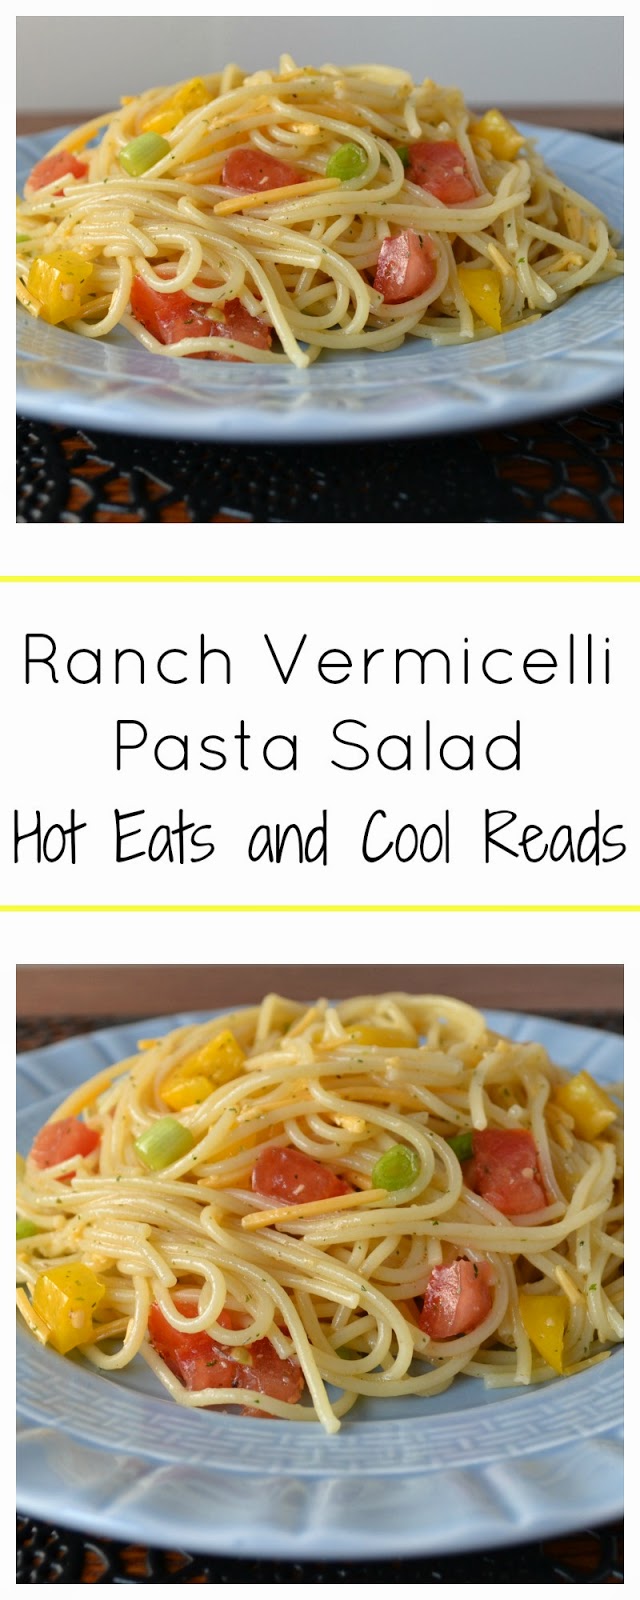 Hot Eats and Cool Reads: Ranch Vermicelli Pasta Salad Recipe